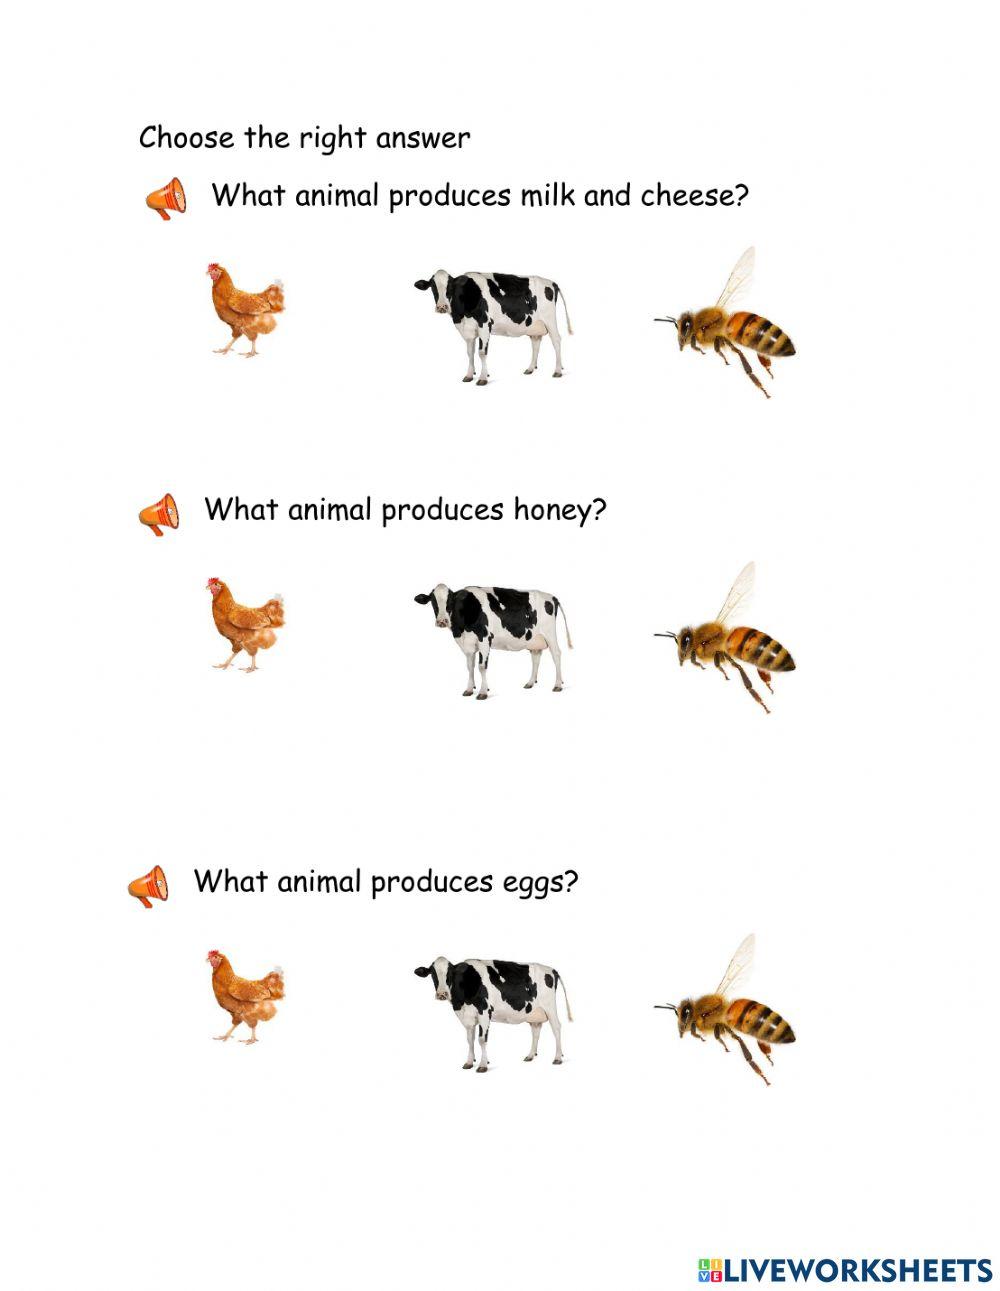 Food from animals